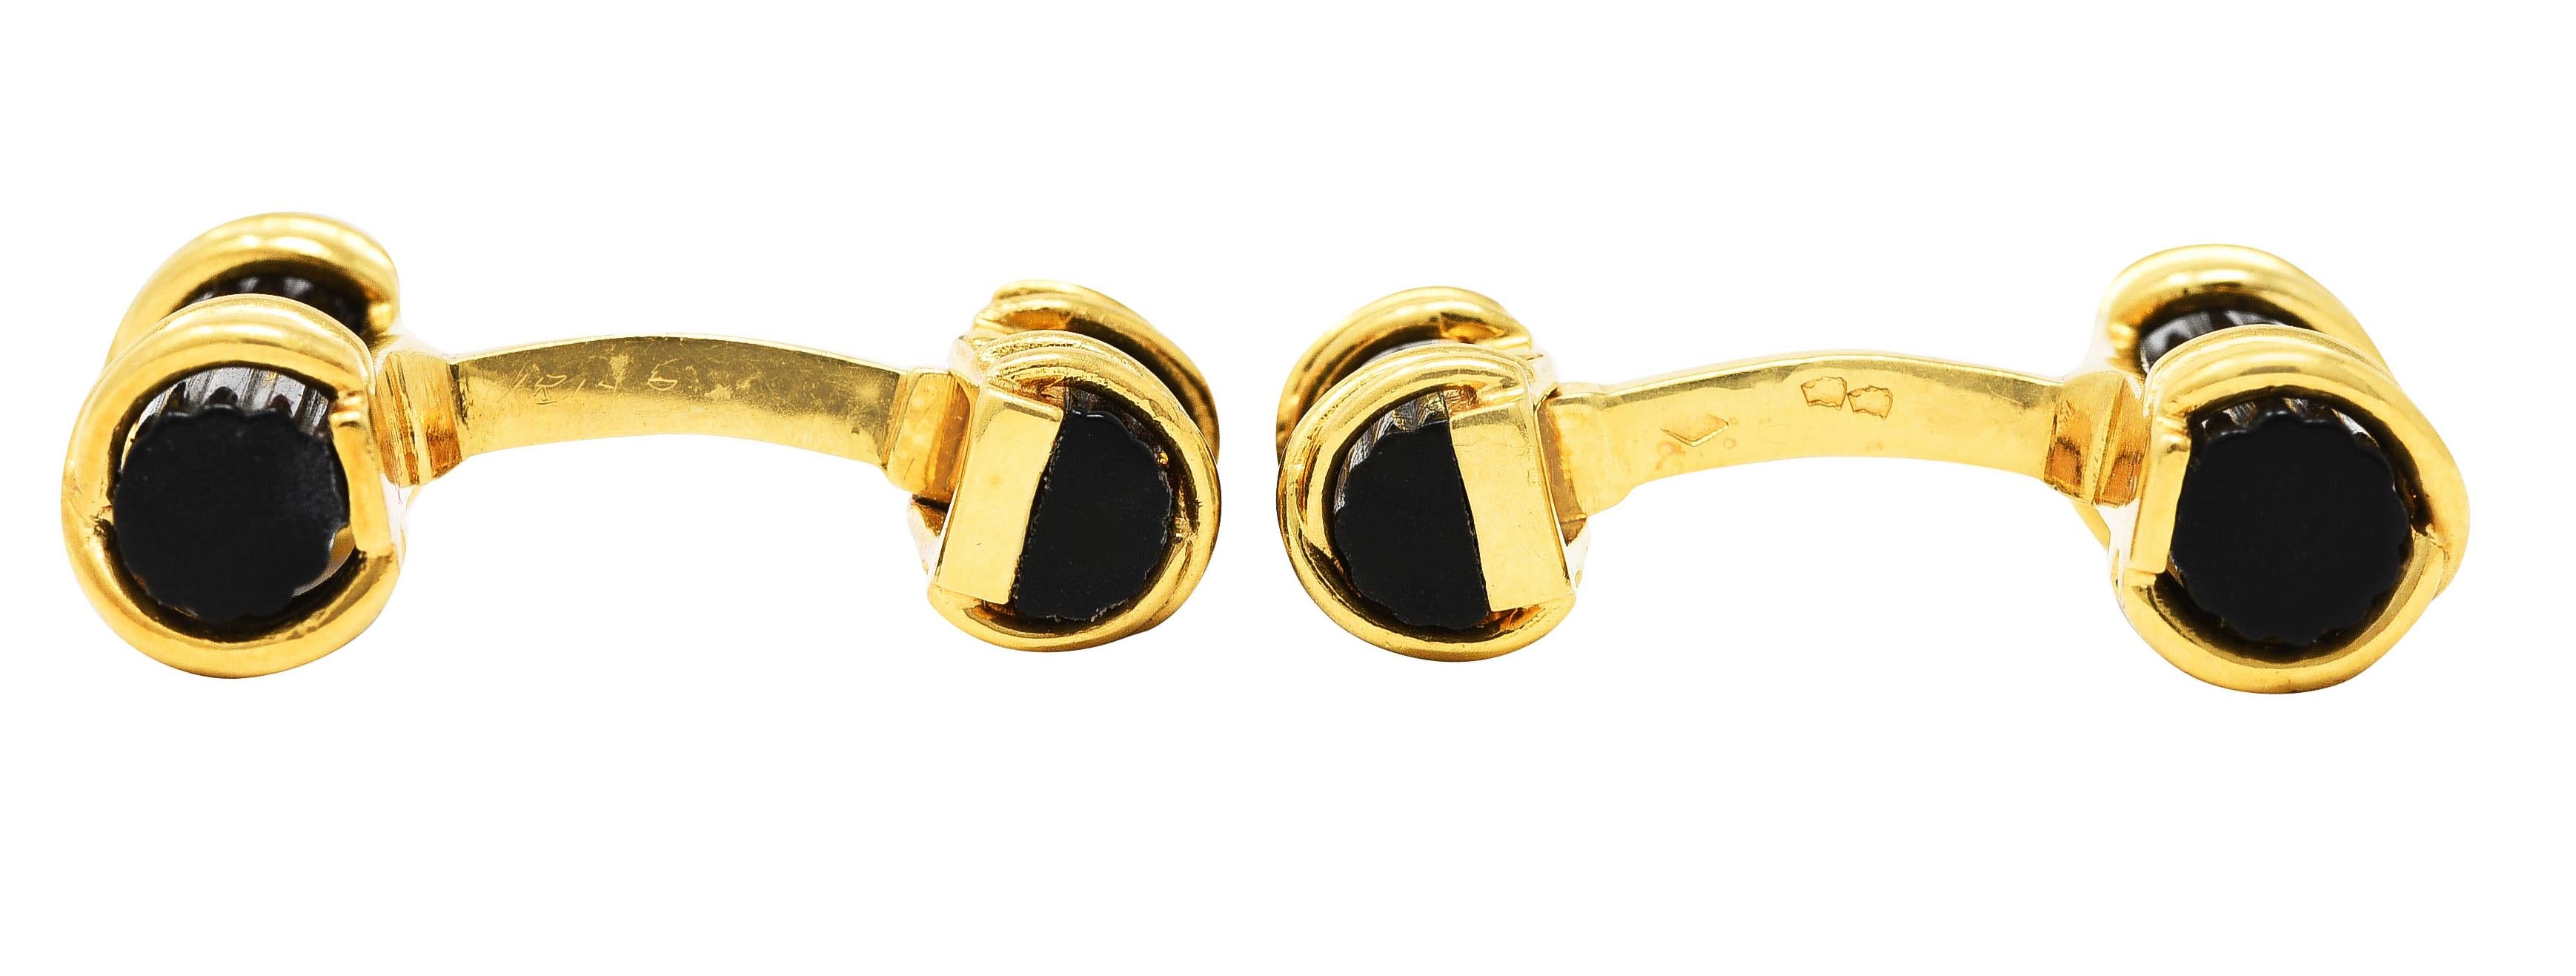 Leverback cufflinks with bar terminals comprised of carved horn

Horn is opaque brown to black with moderate striation and good polish

Fluted horn is encompassed by a stylized polished gold X motif

Stamped 18k with French assay marks for 18 karat